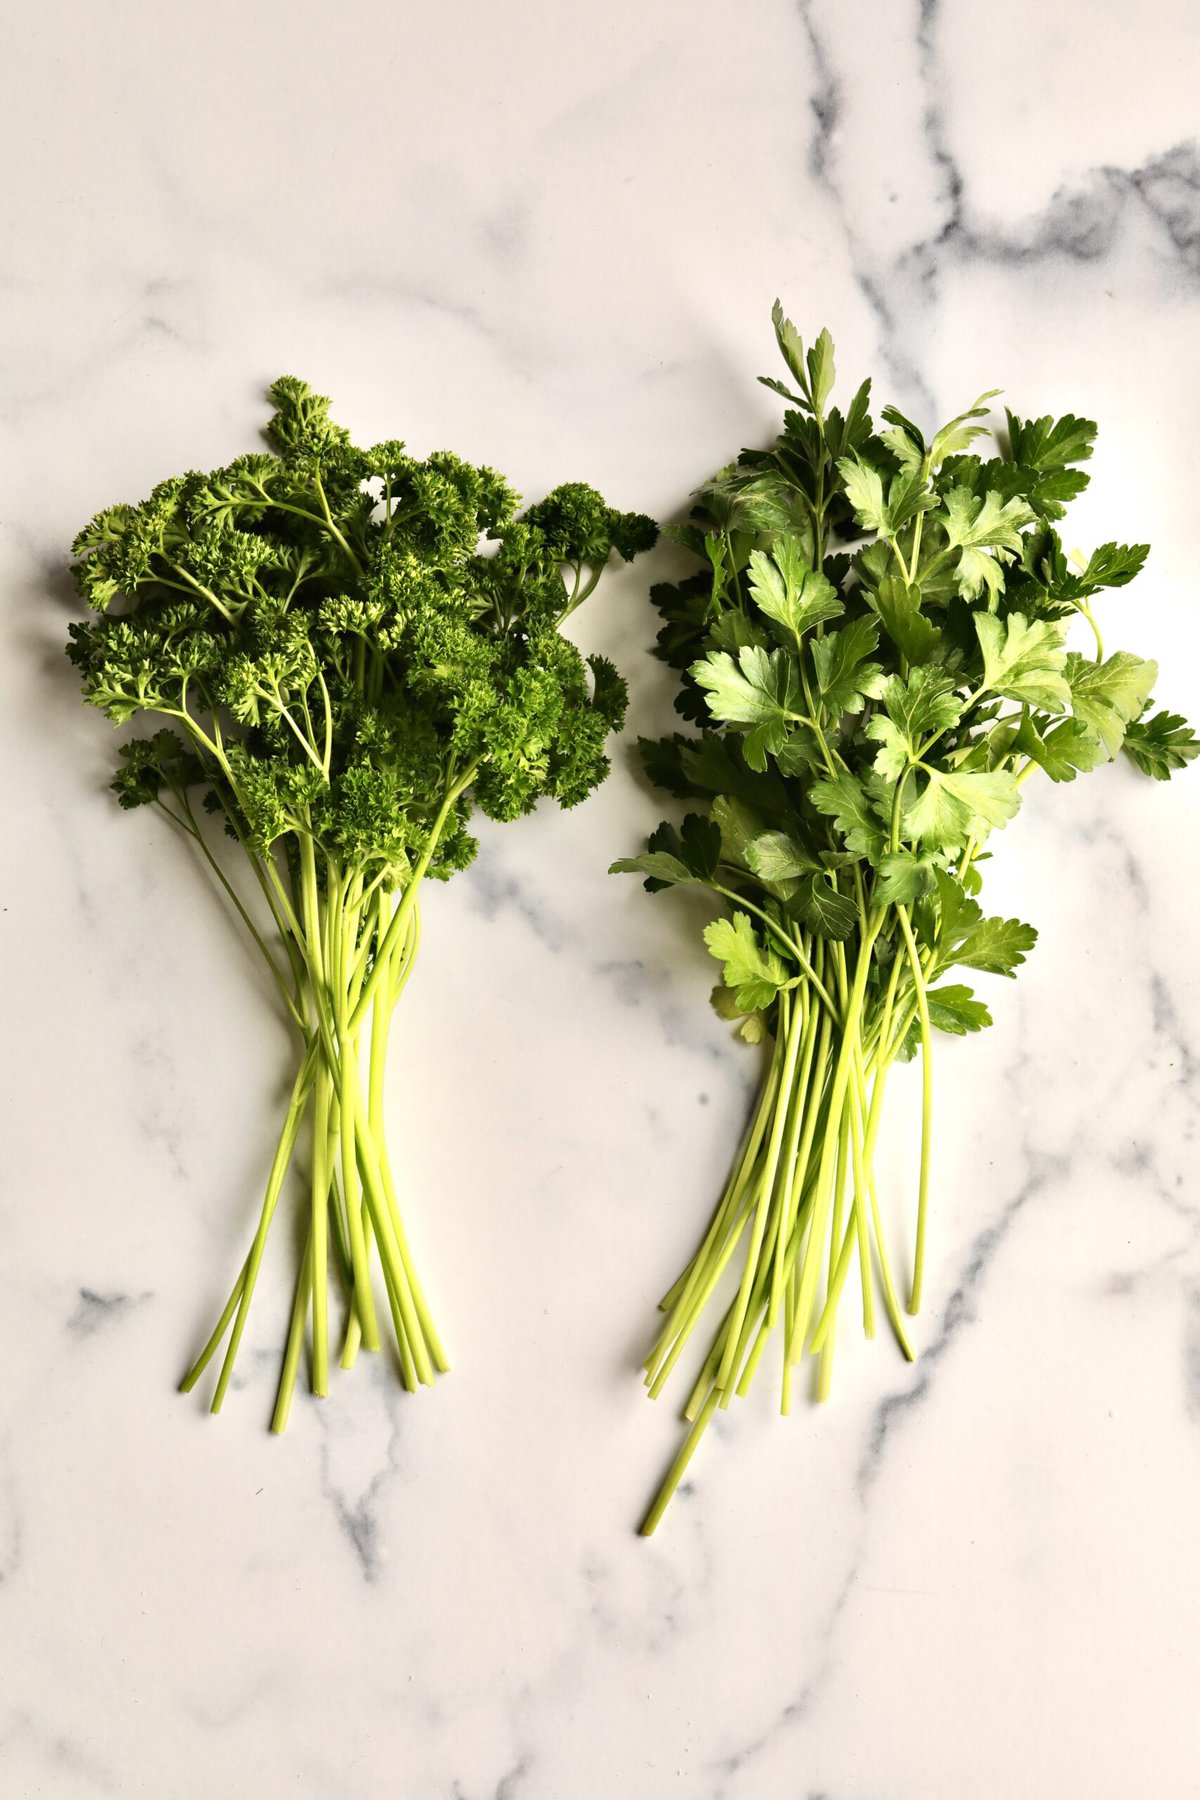 comparing flat leaf Italian parsley and curly parsley.